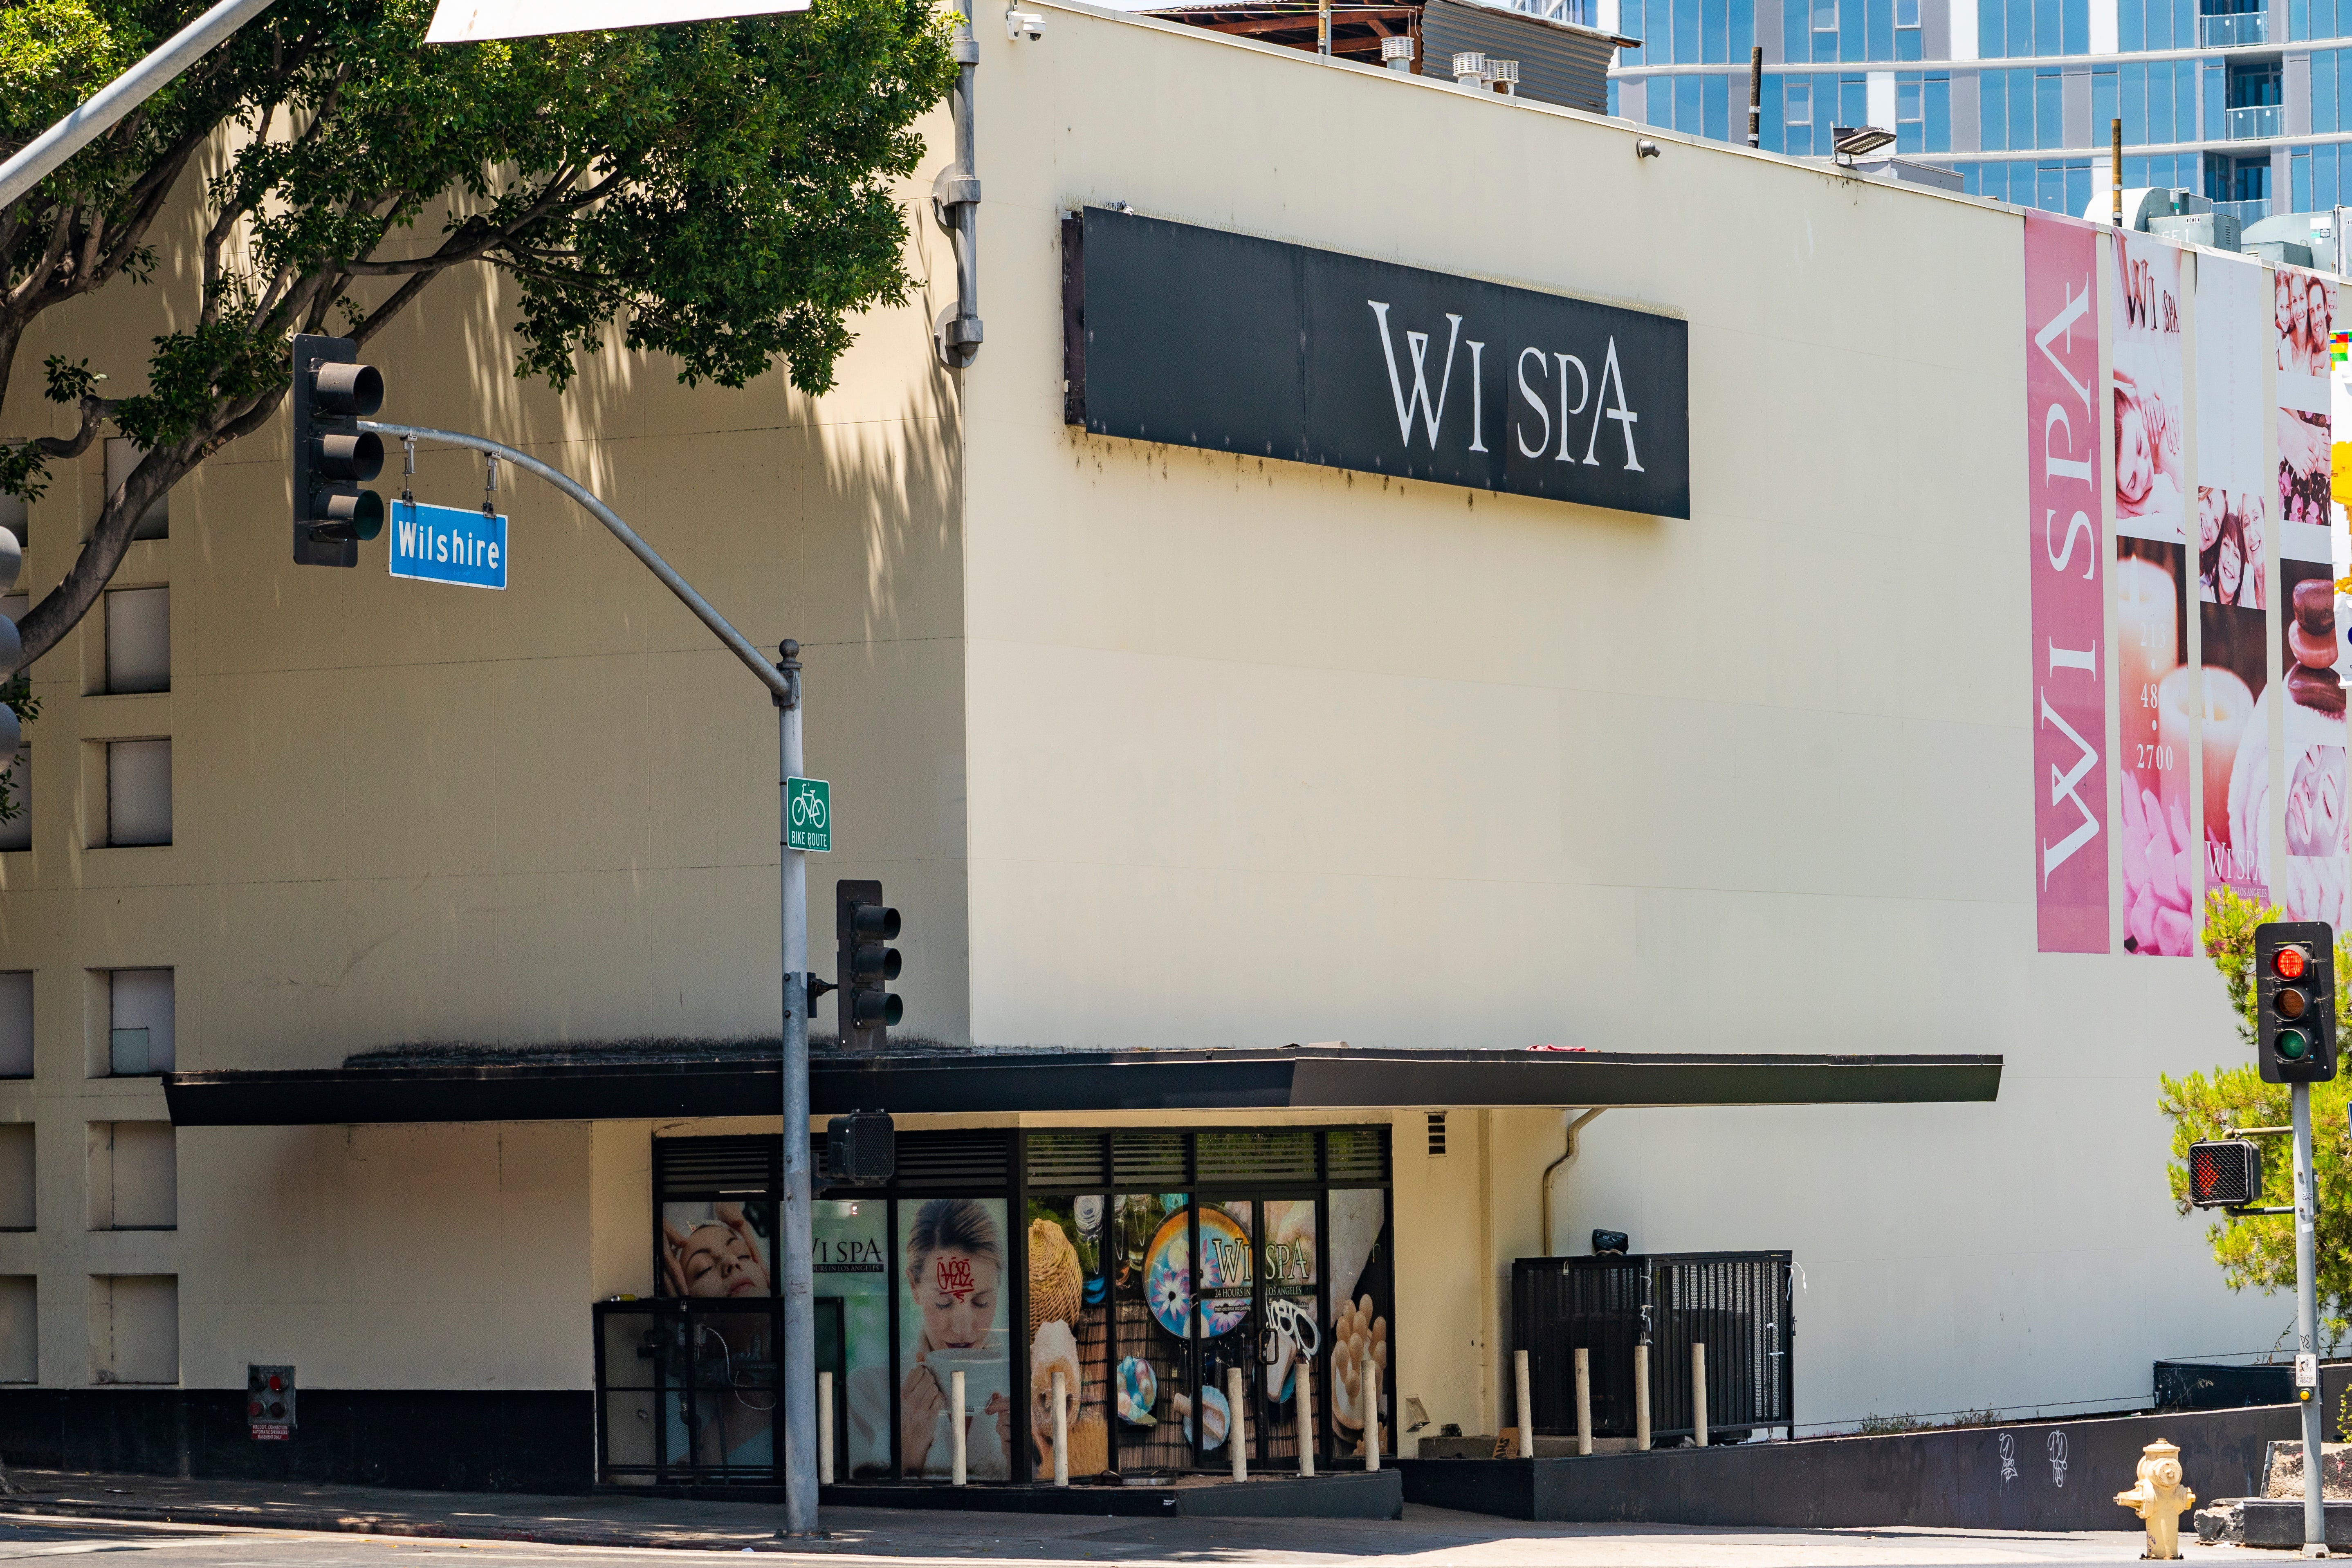 The Wi Spa in Los Angeles’ Koreatown has seen violent clashes over its trans-inclusive policies.